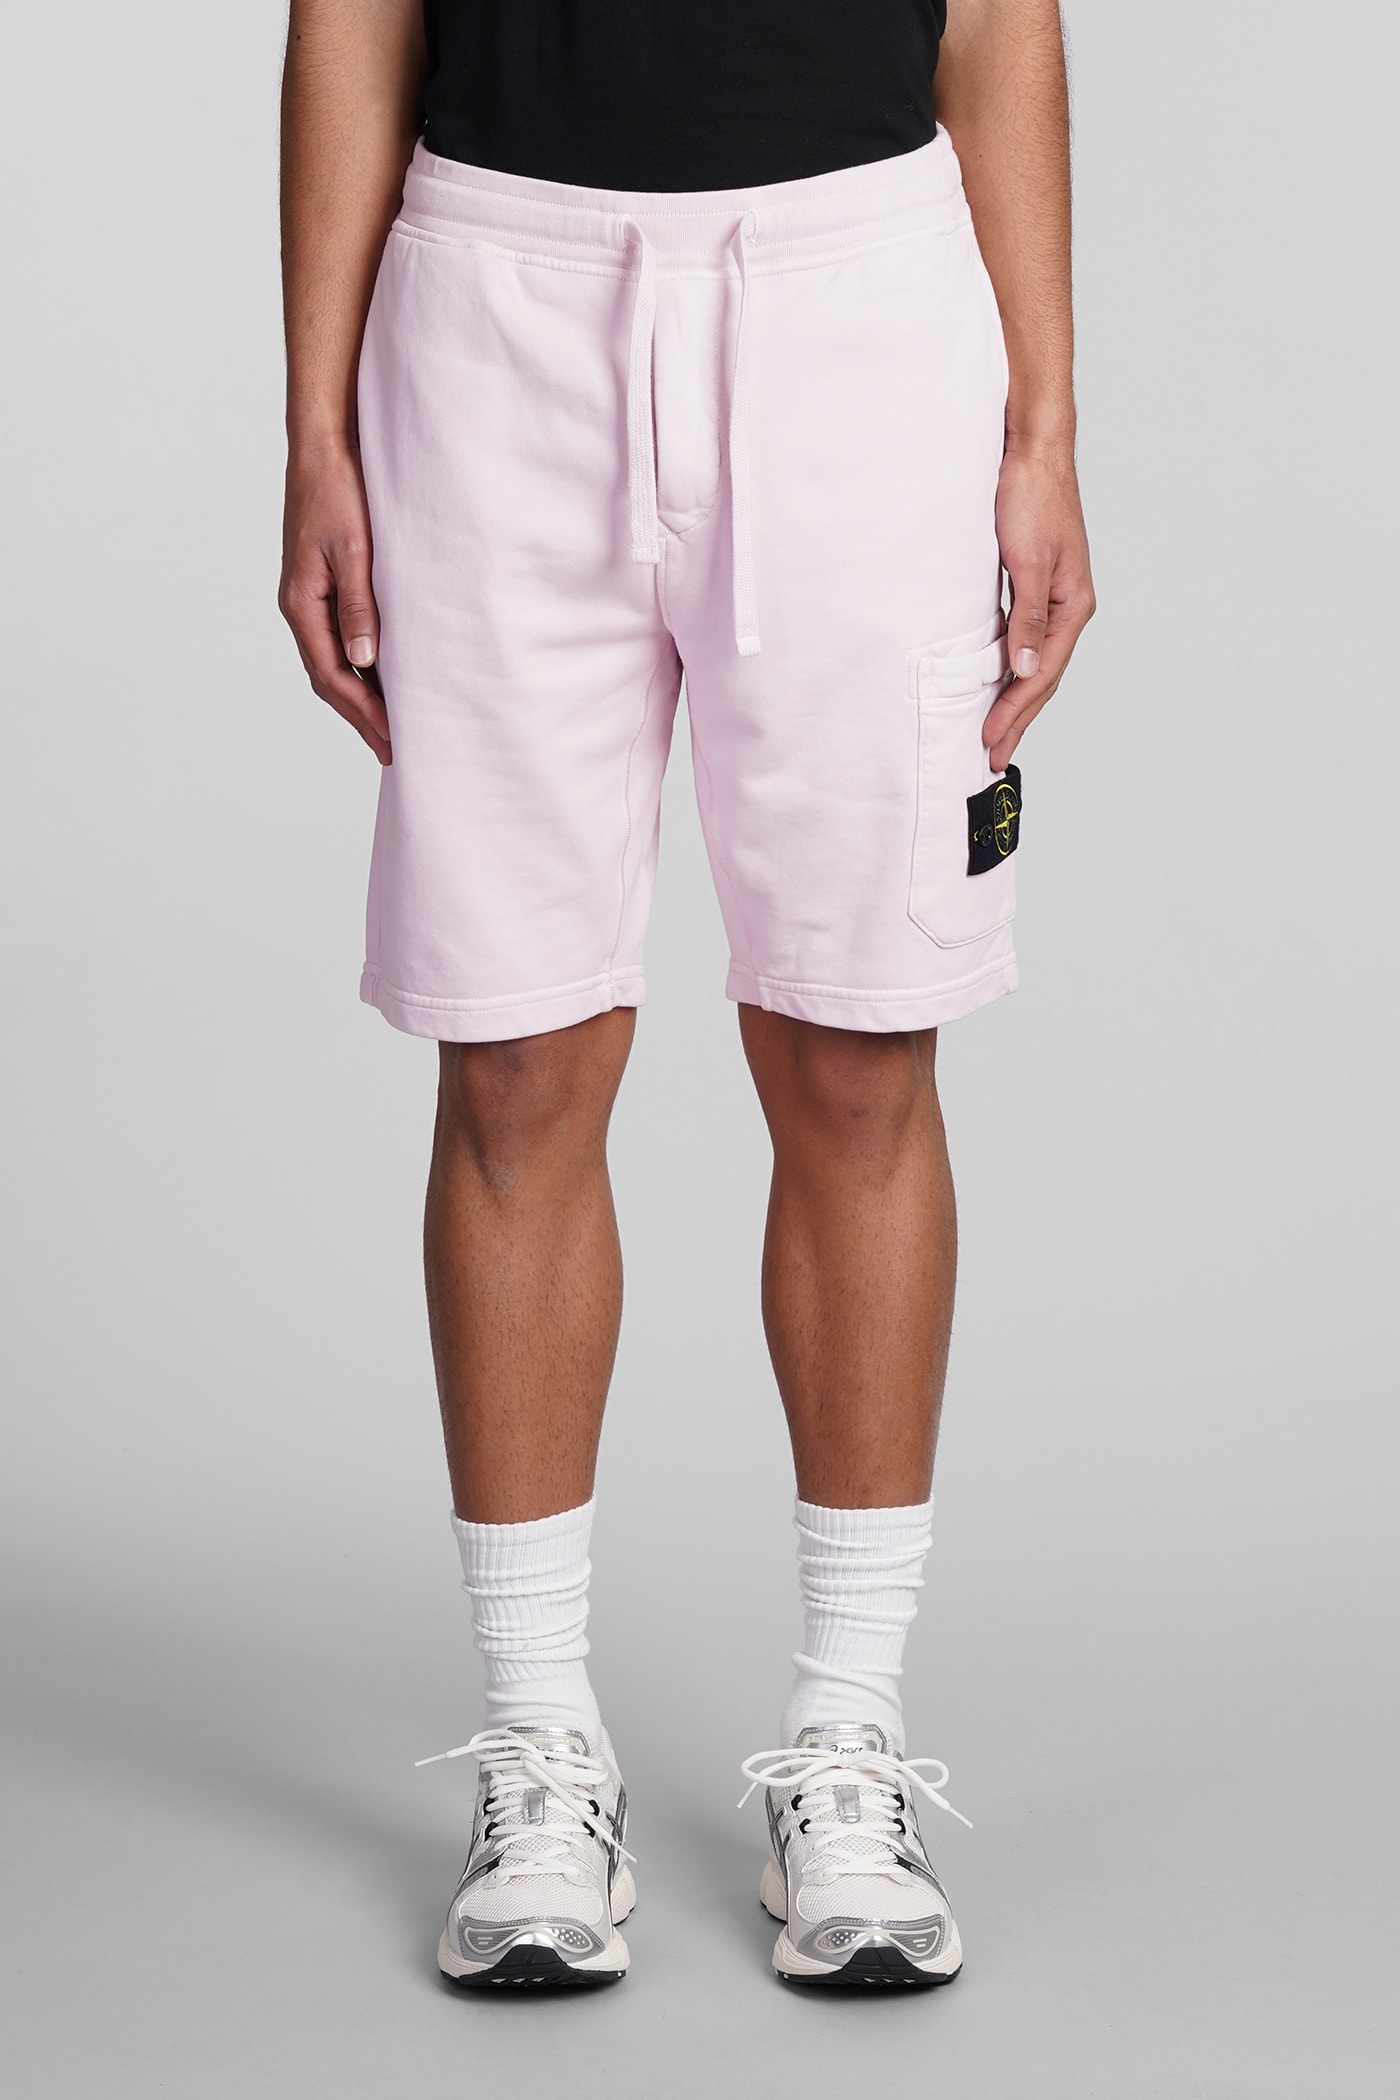 STONE ISLAND SHORTS IN ROSE-PINK COTTON